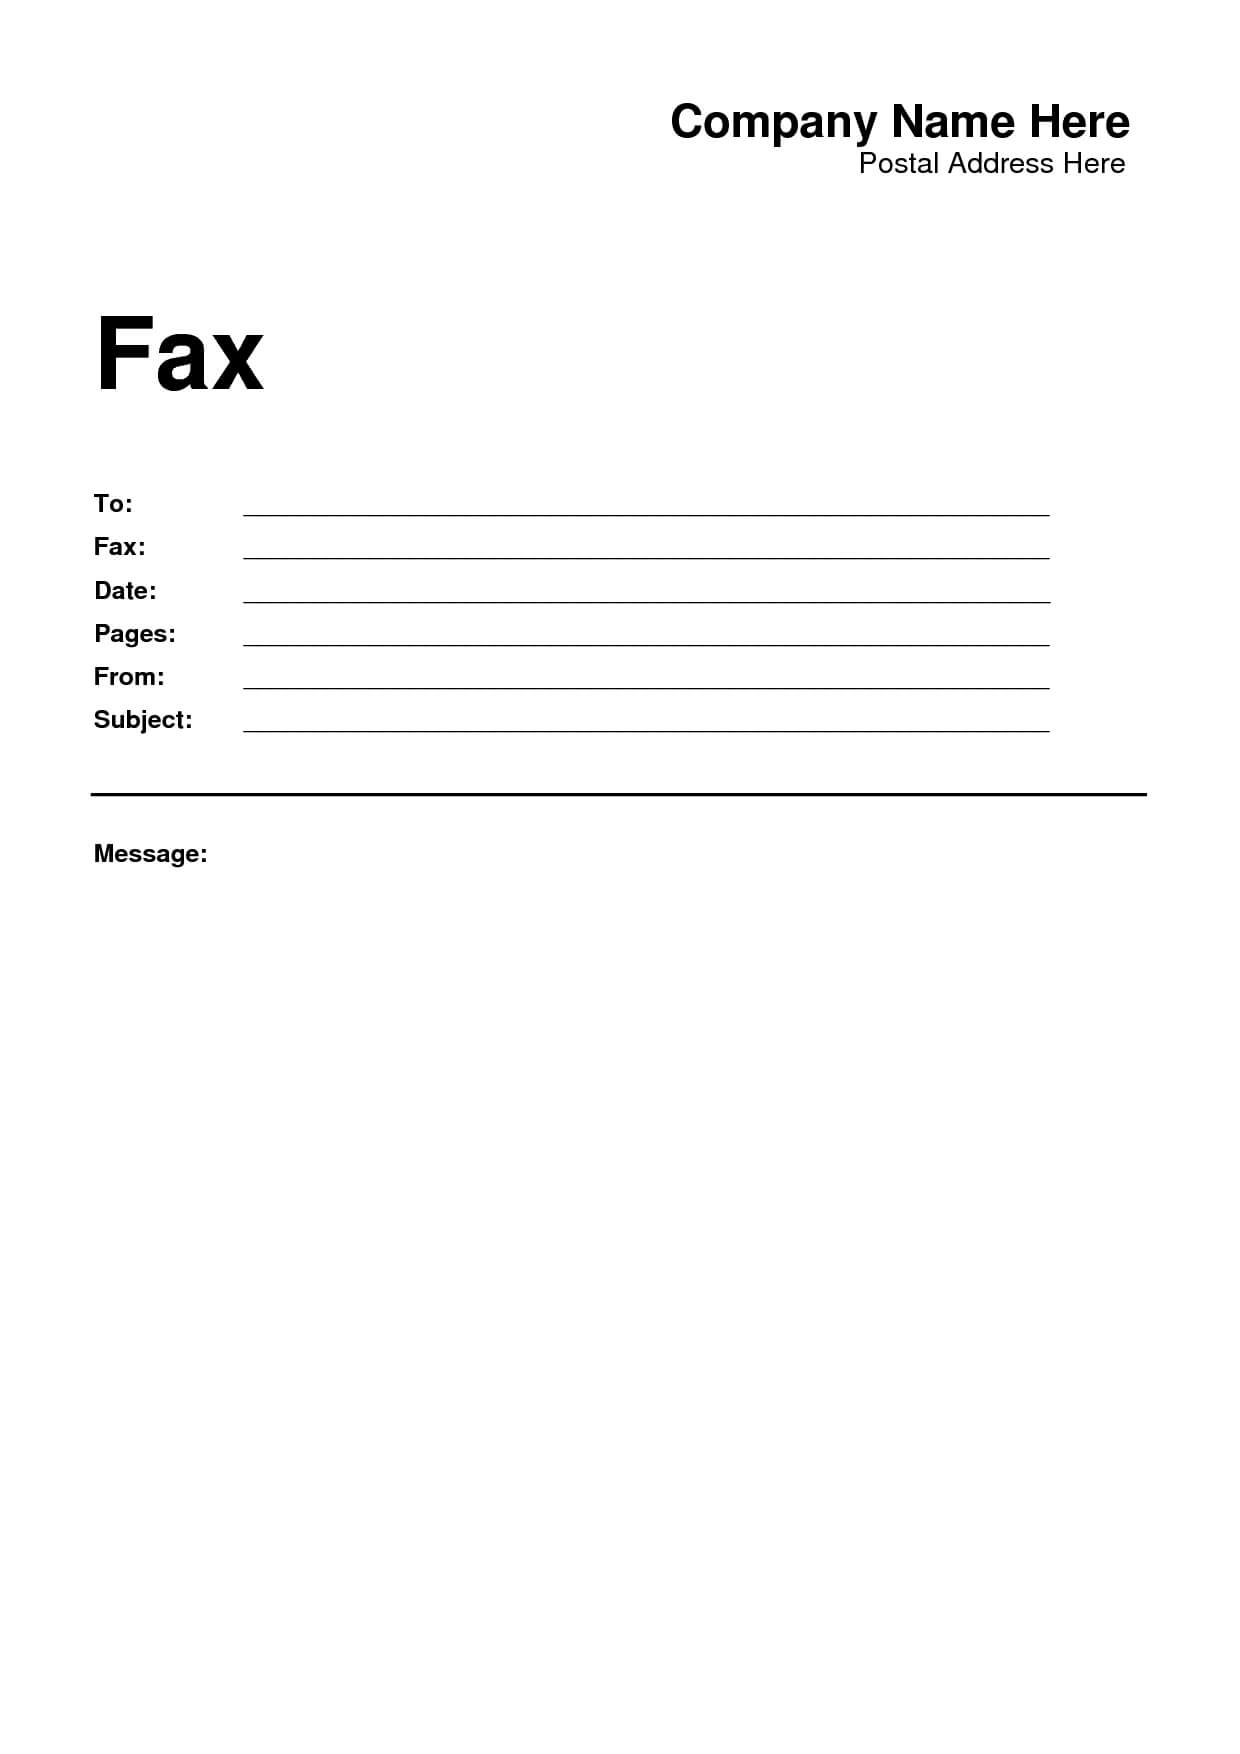 Fax Cover Sheet Template Word Spreadsheet Examples Printable With Regard To Fax Template Word 2010